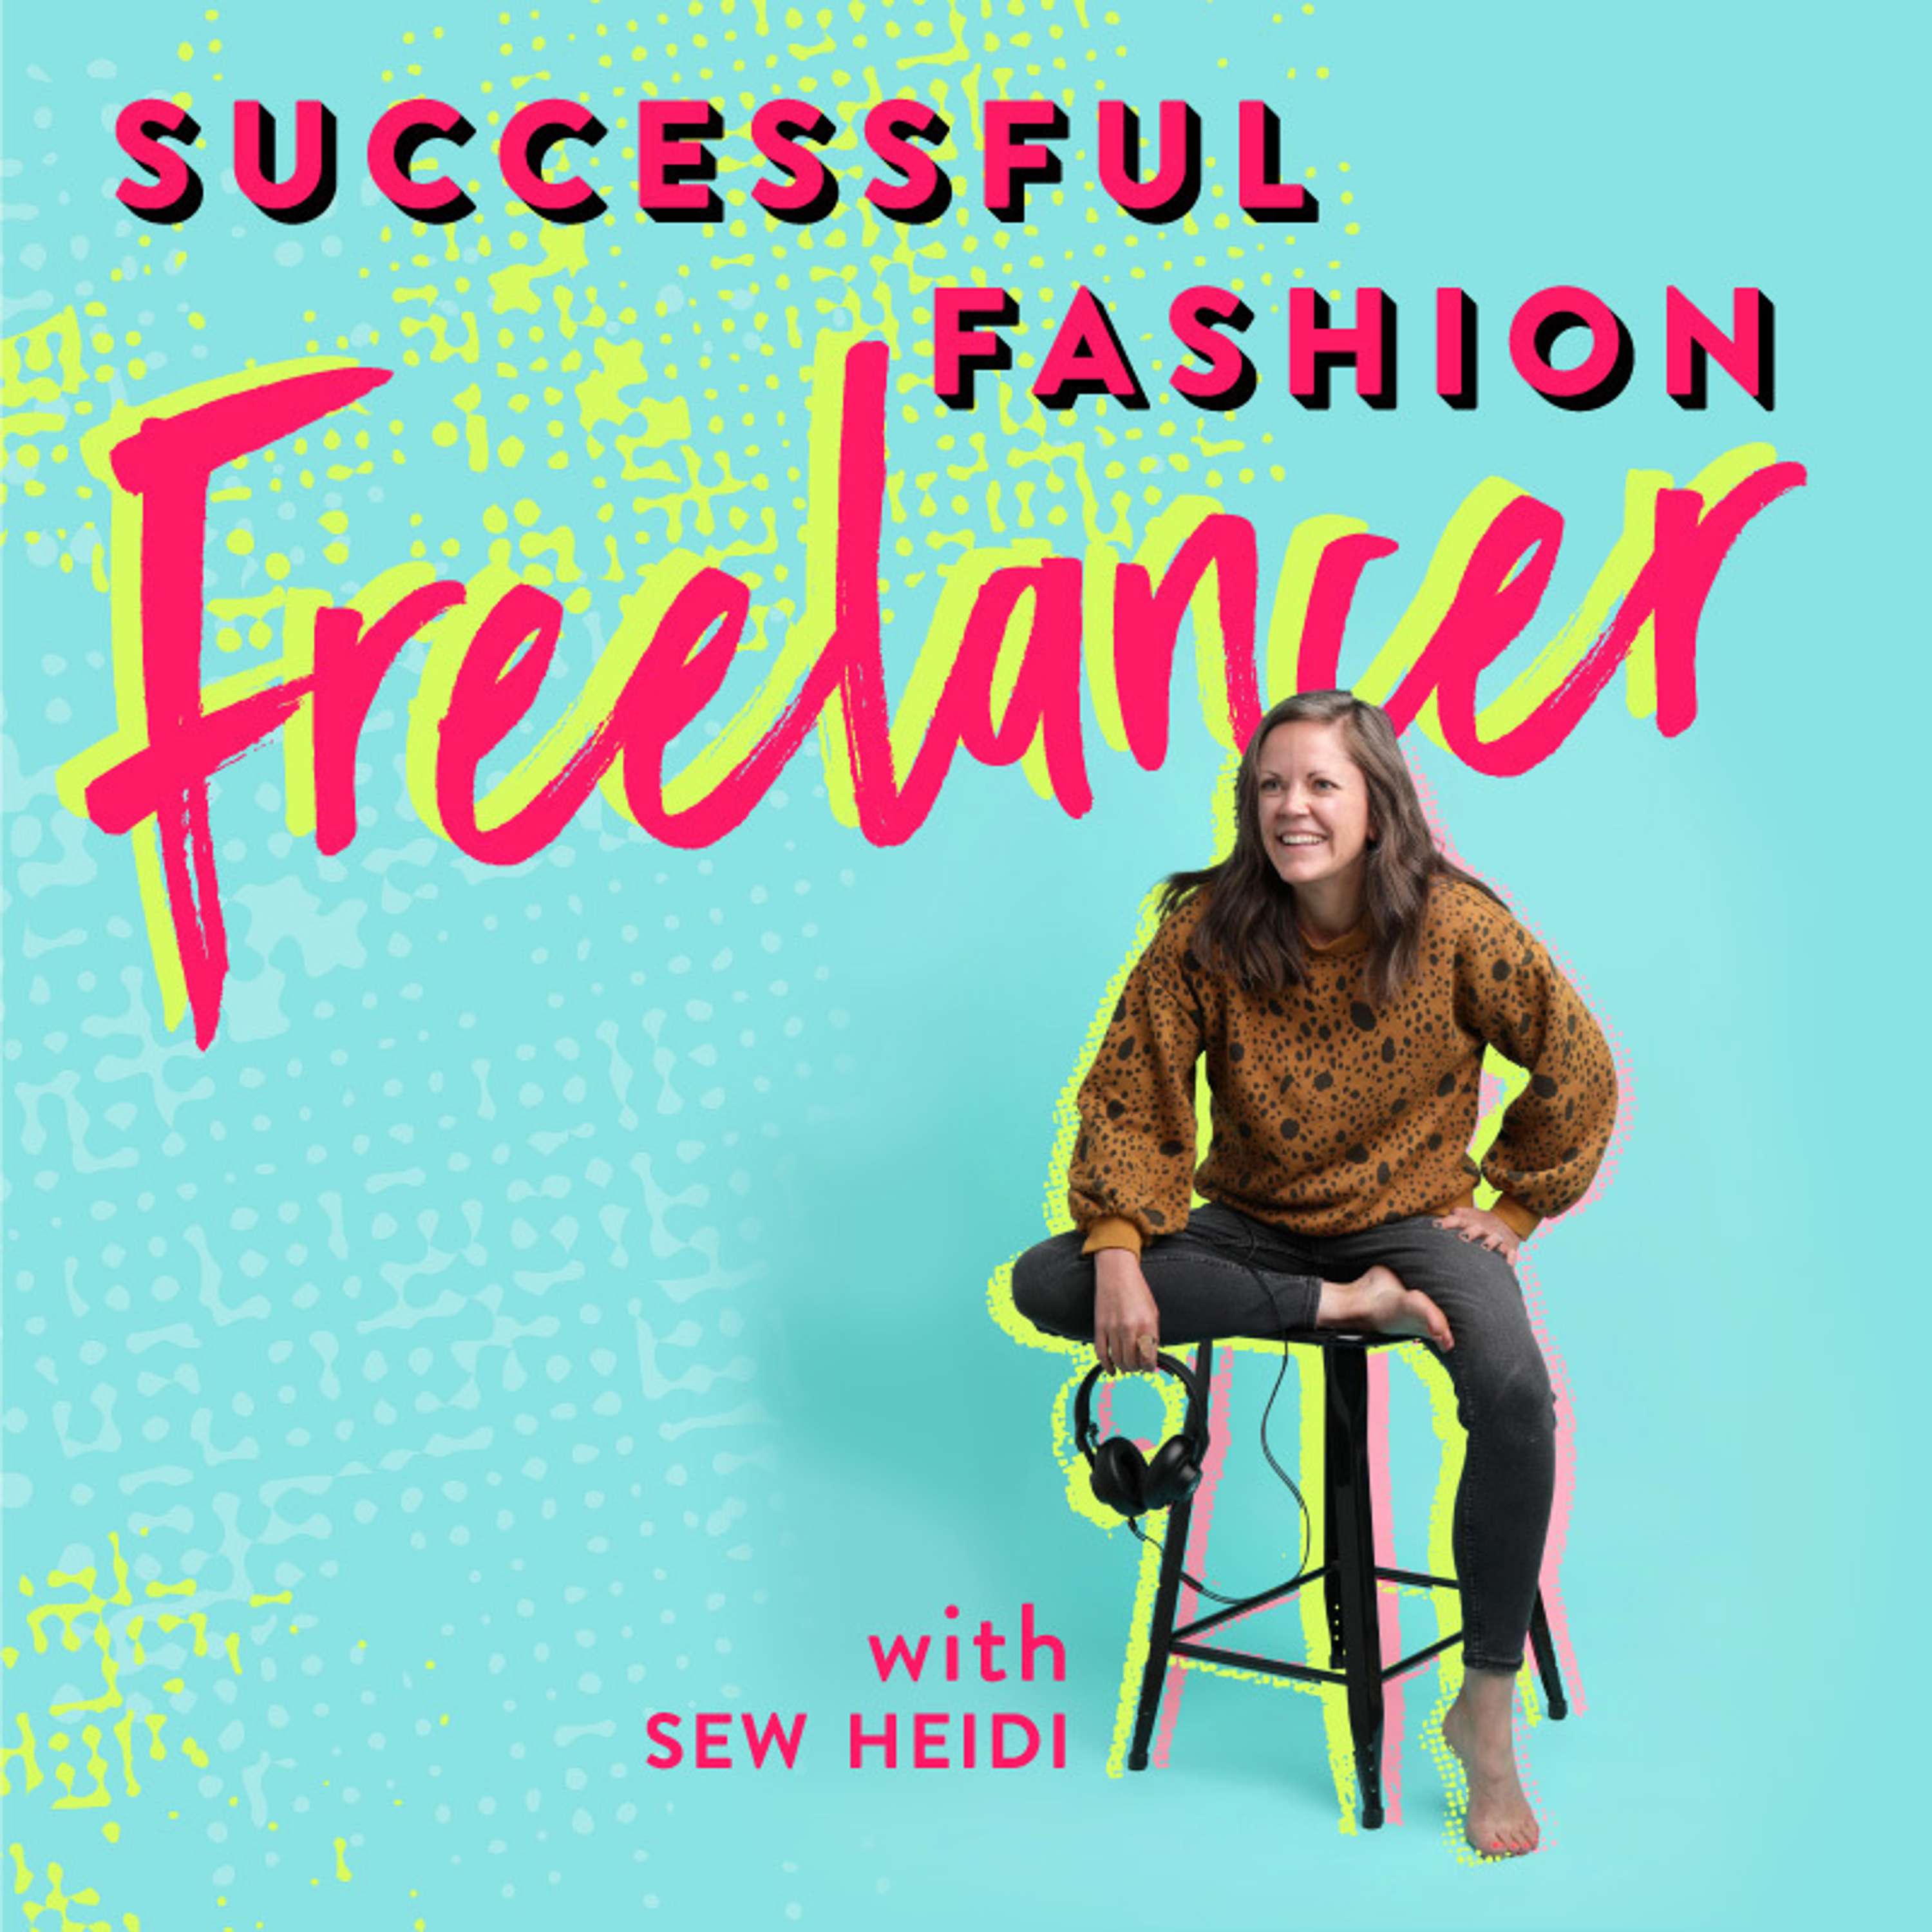 SFF155: Fashion Freelancer Q&A: I Have 15 Clients and Am on the Struggle Bus